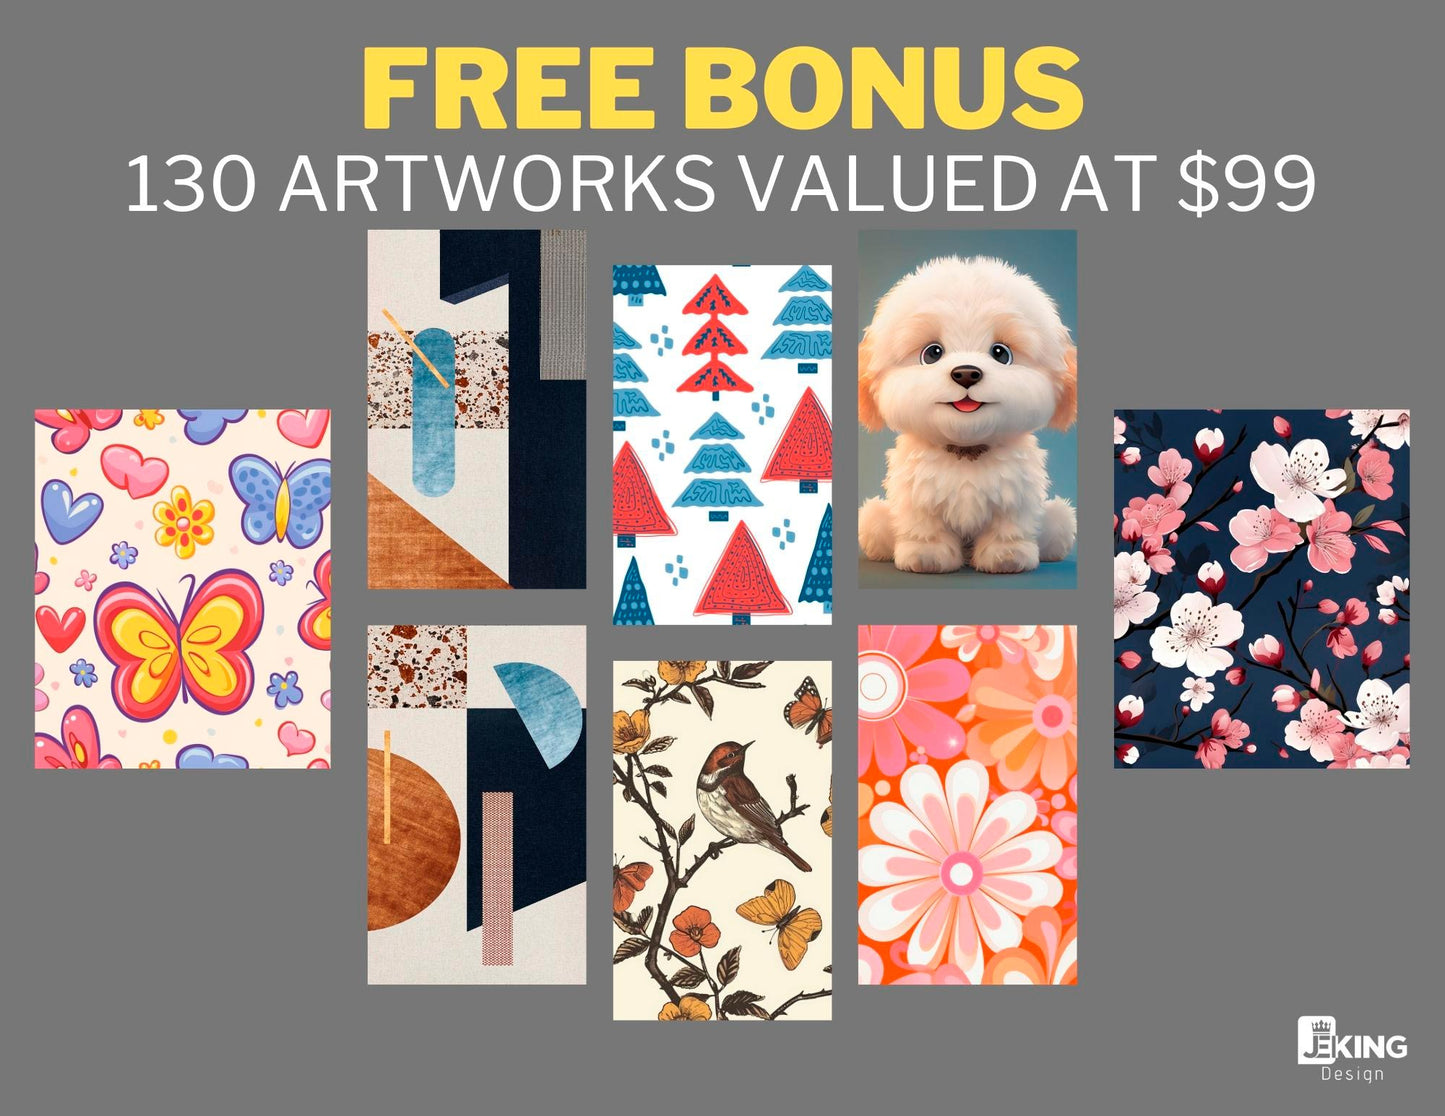 Decor Time Prints + Free Bonus Valued at $99: Buy Two, Get One Free – Three Premium Digital Artworks for the Price of Two. High-Resolution PNG and PDF Downloads for Home and Office Decor